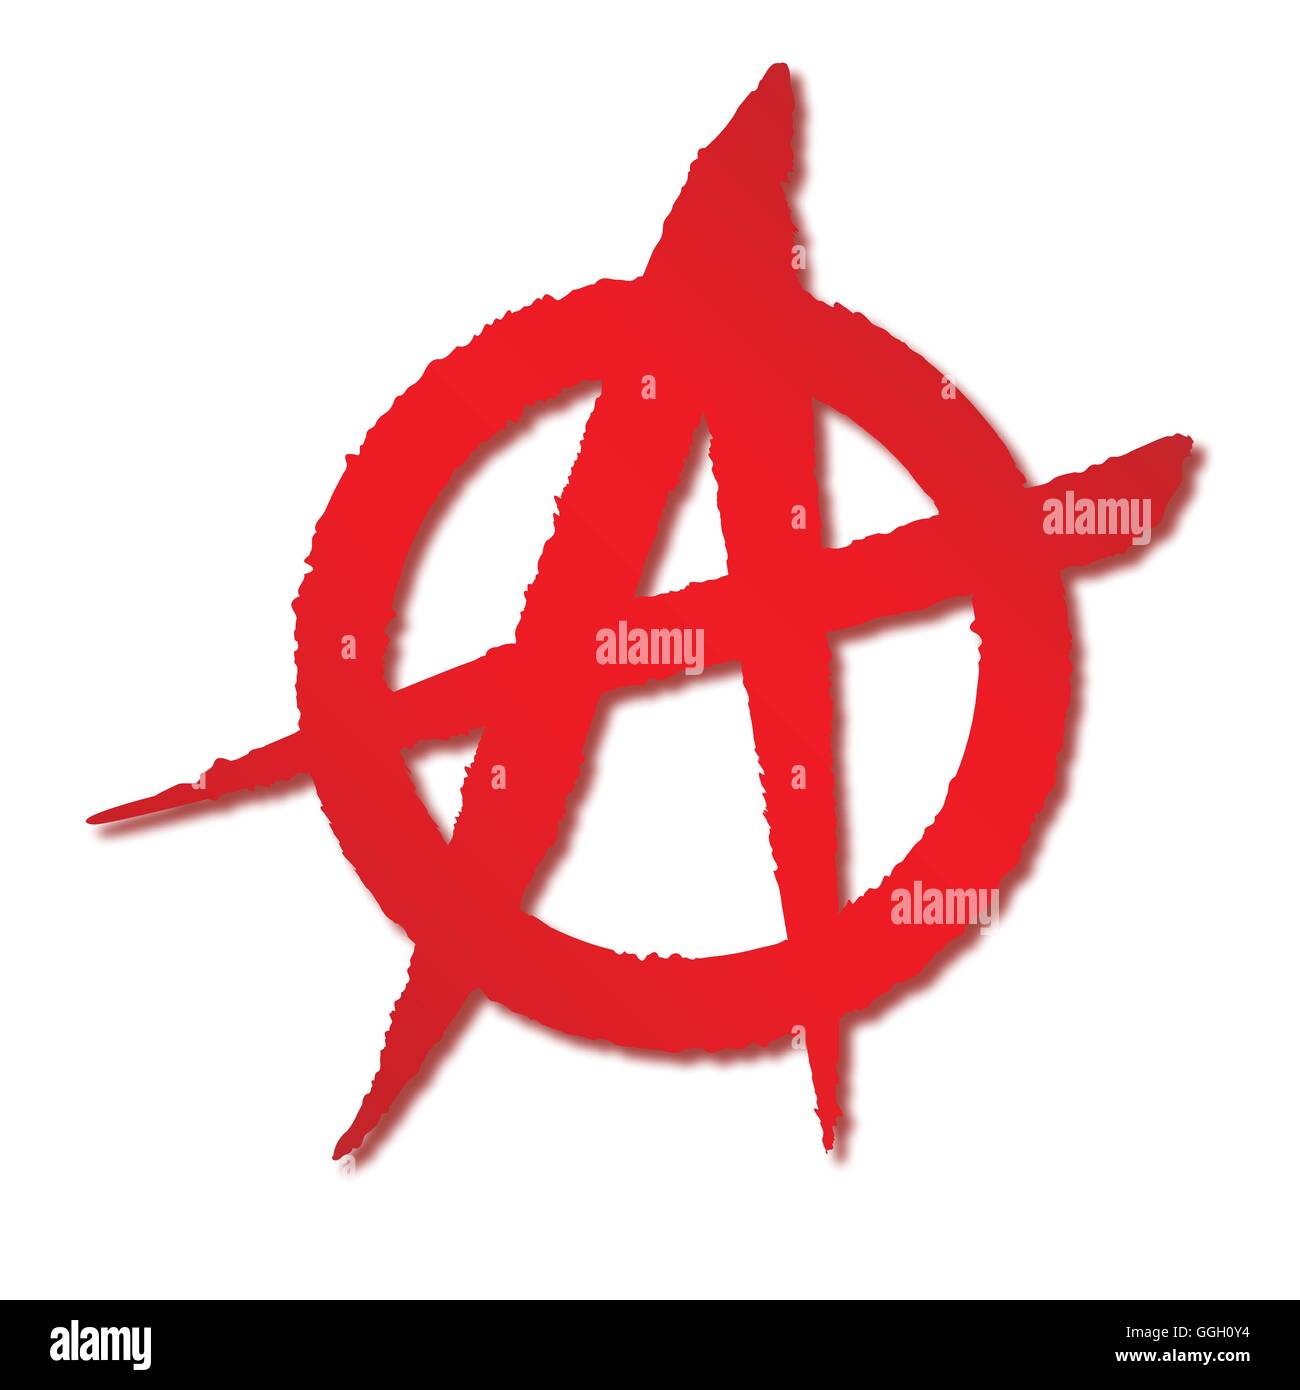 A red on white rough sprayed anarchy symbol Stock Vector